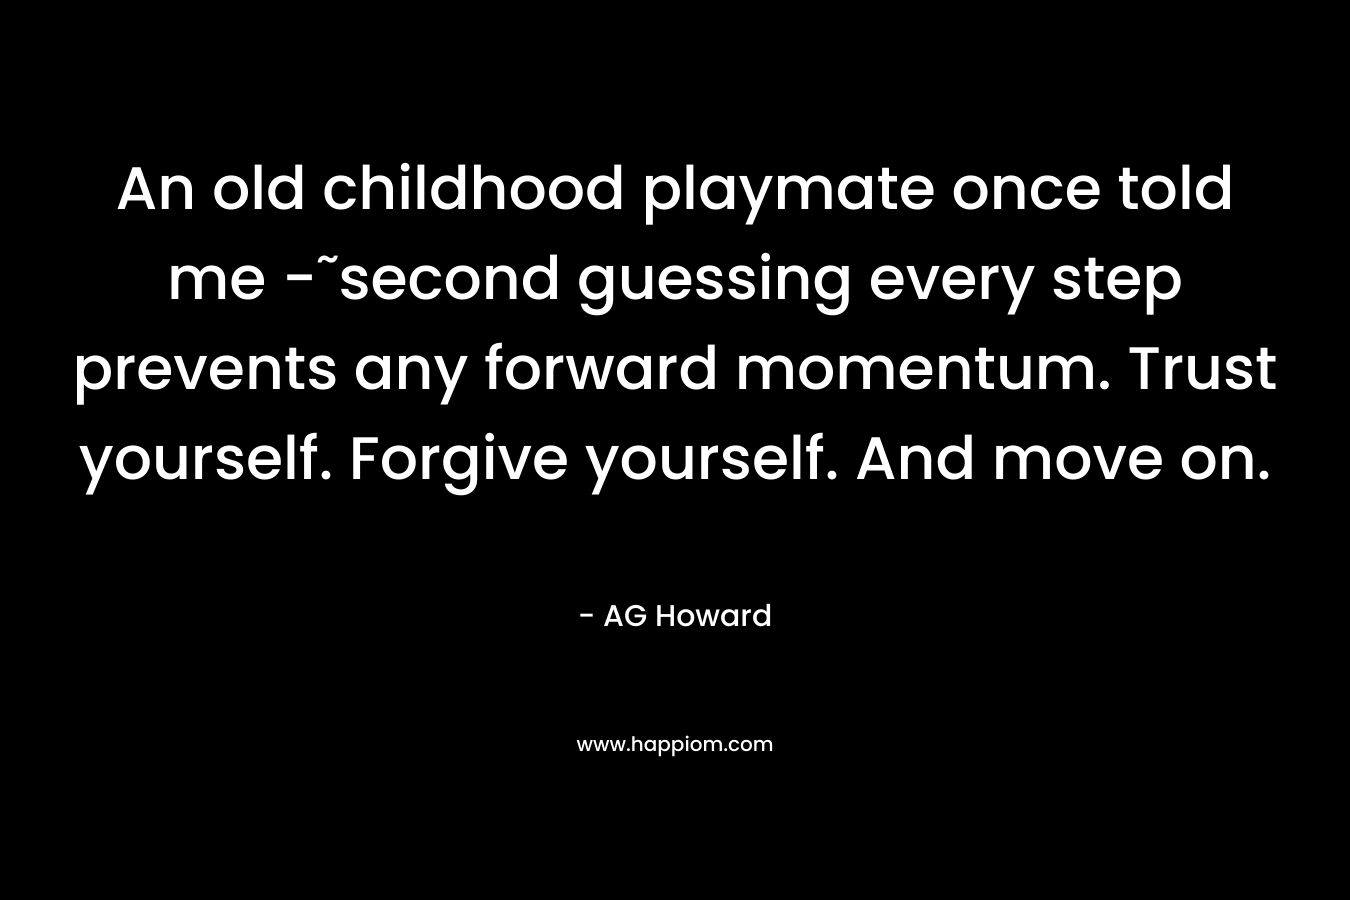 An old childhood playmate once told me -˜second guessing every step prevents any forward momentum. Trust yourself. Forgive yourself. And move on.